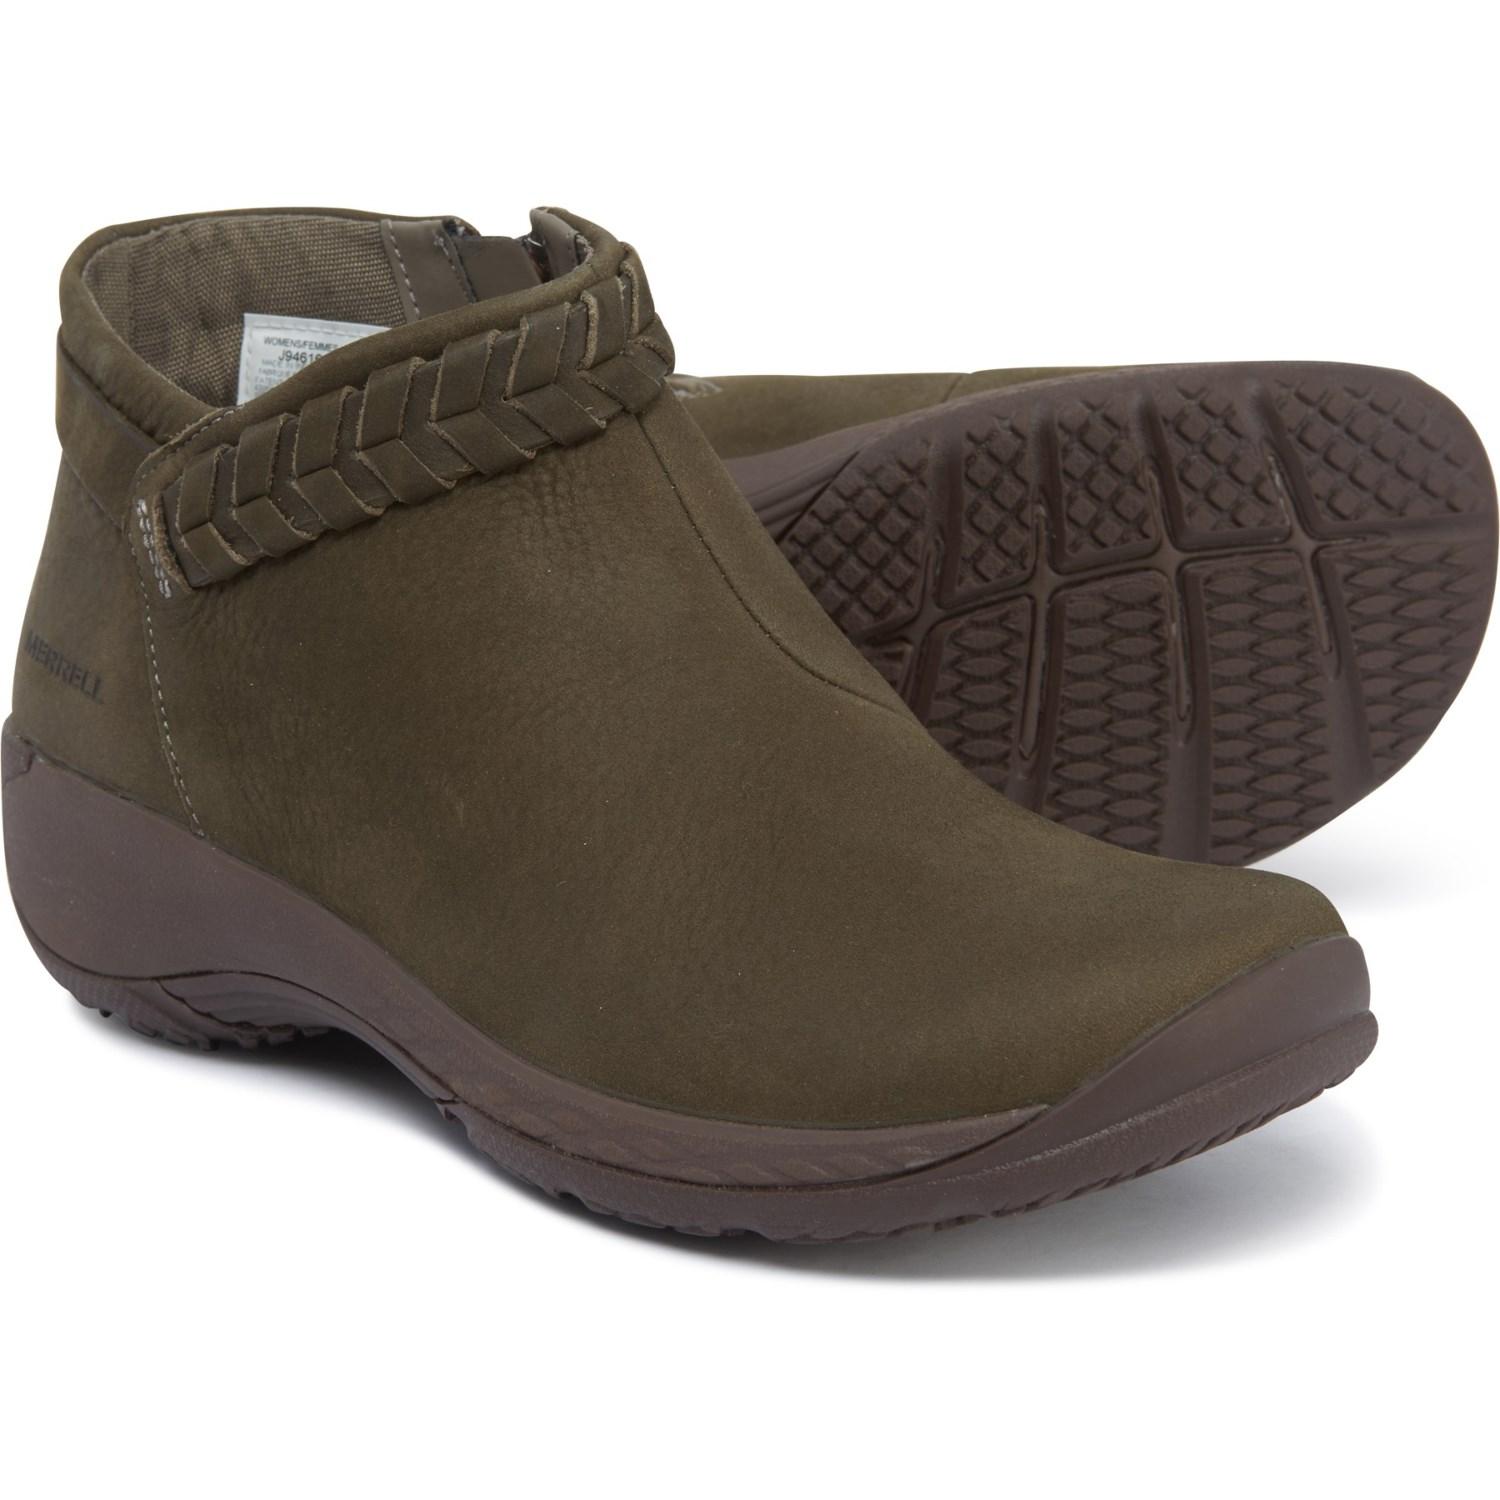 Merrell Leather Encore Braided Bluff Q2 Boots in Olive (Green) - Lyst